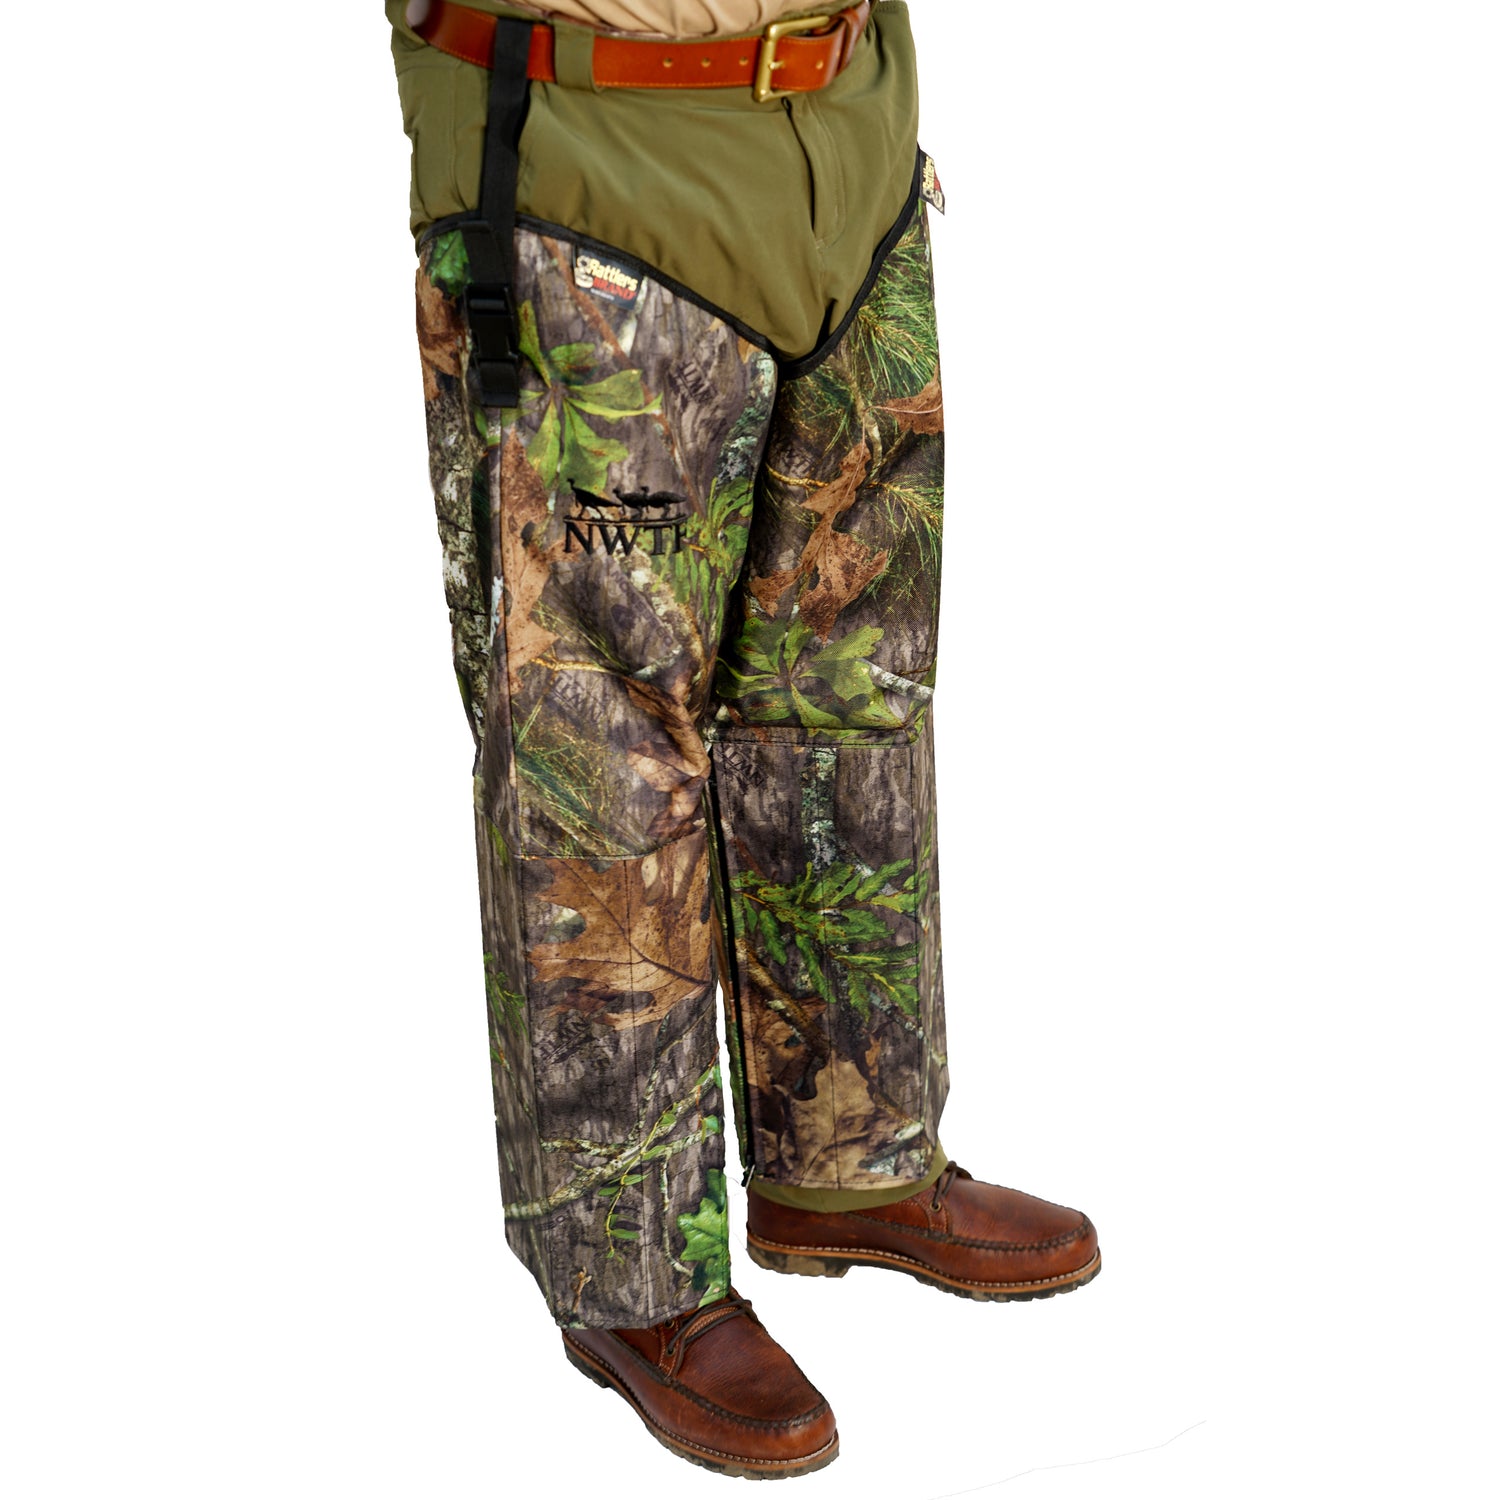 Snakeproof Chaps and Gaiters